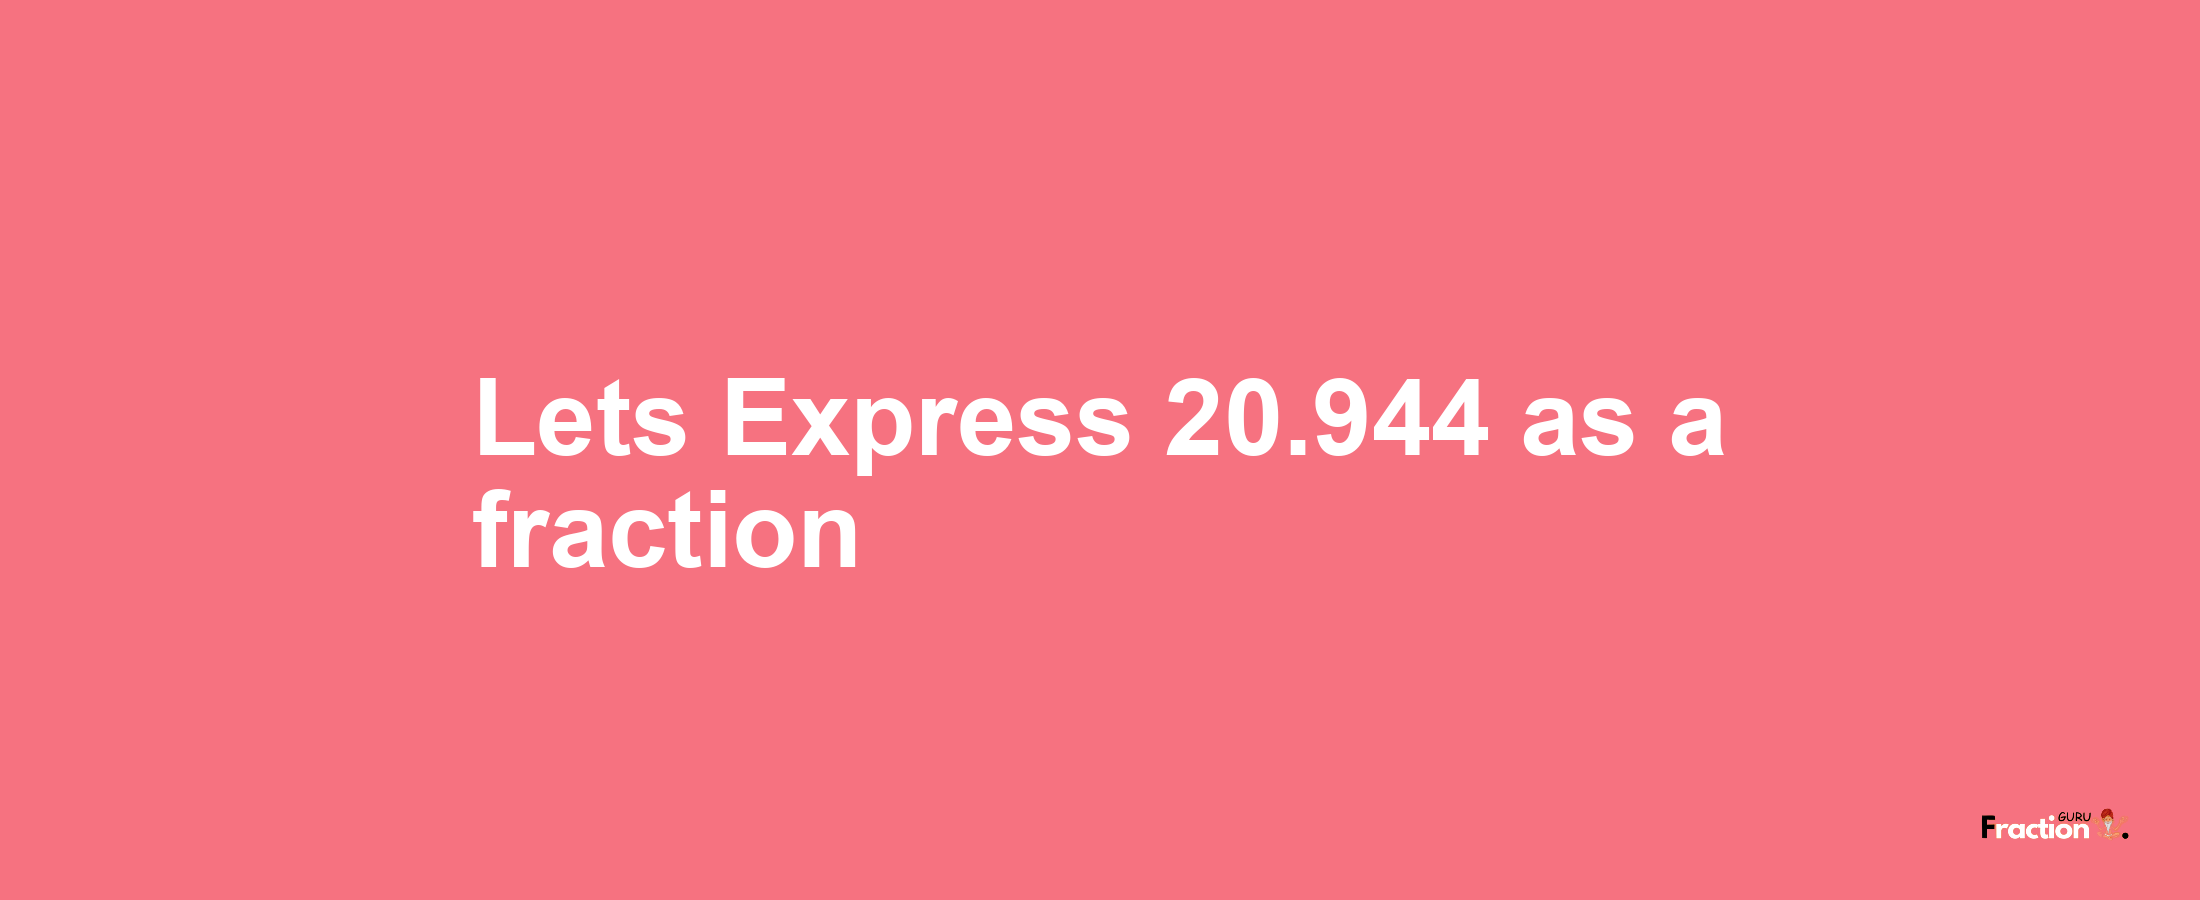 Lets Express 20.944 as afraction